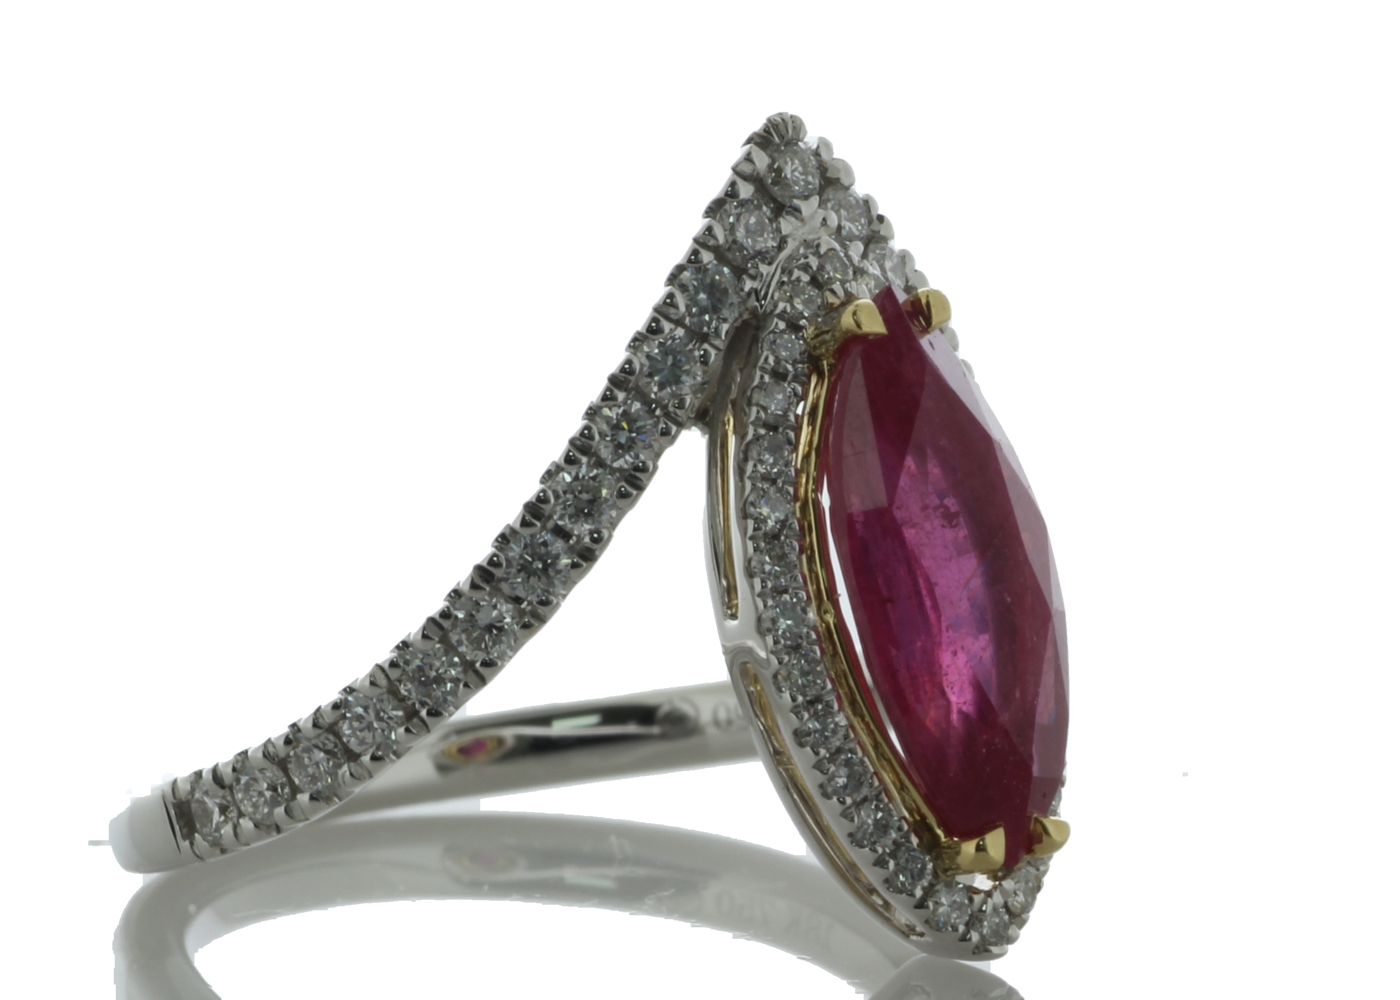 18ct White Gold Marquise Cut Ruby and Diamond Ring (R2.11) 0.47 Carats - Image 2 of 6